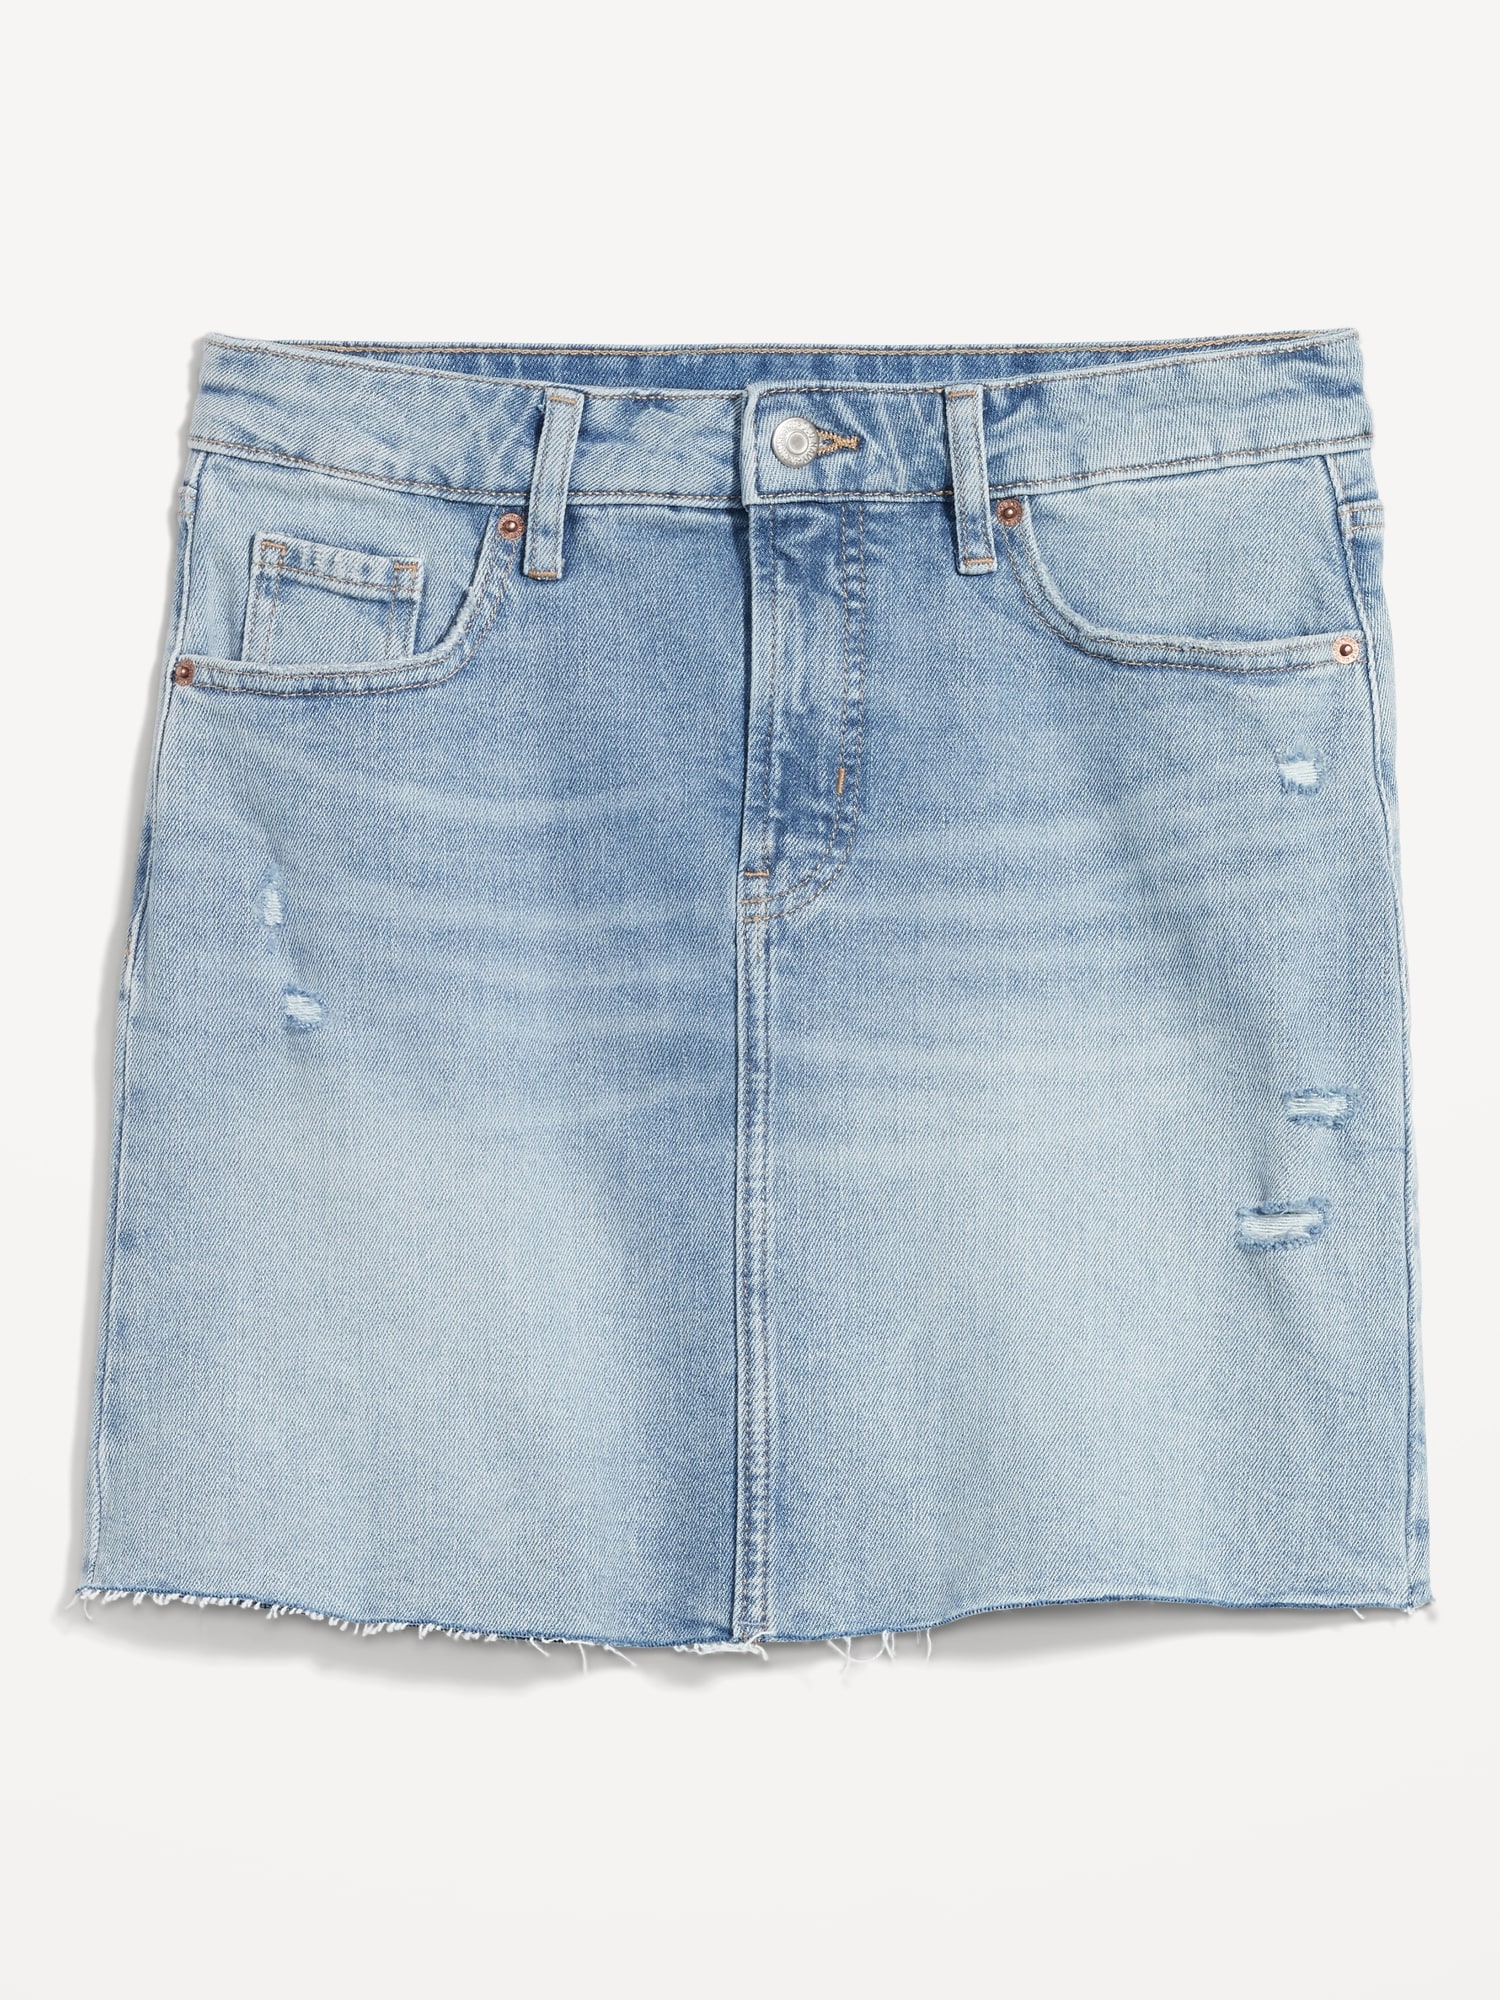 Casual Chic: The Denim Skirt and T-Shirt Combo